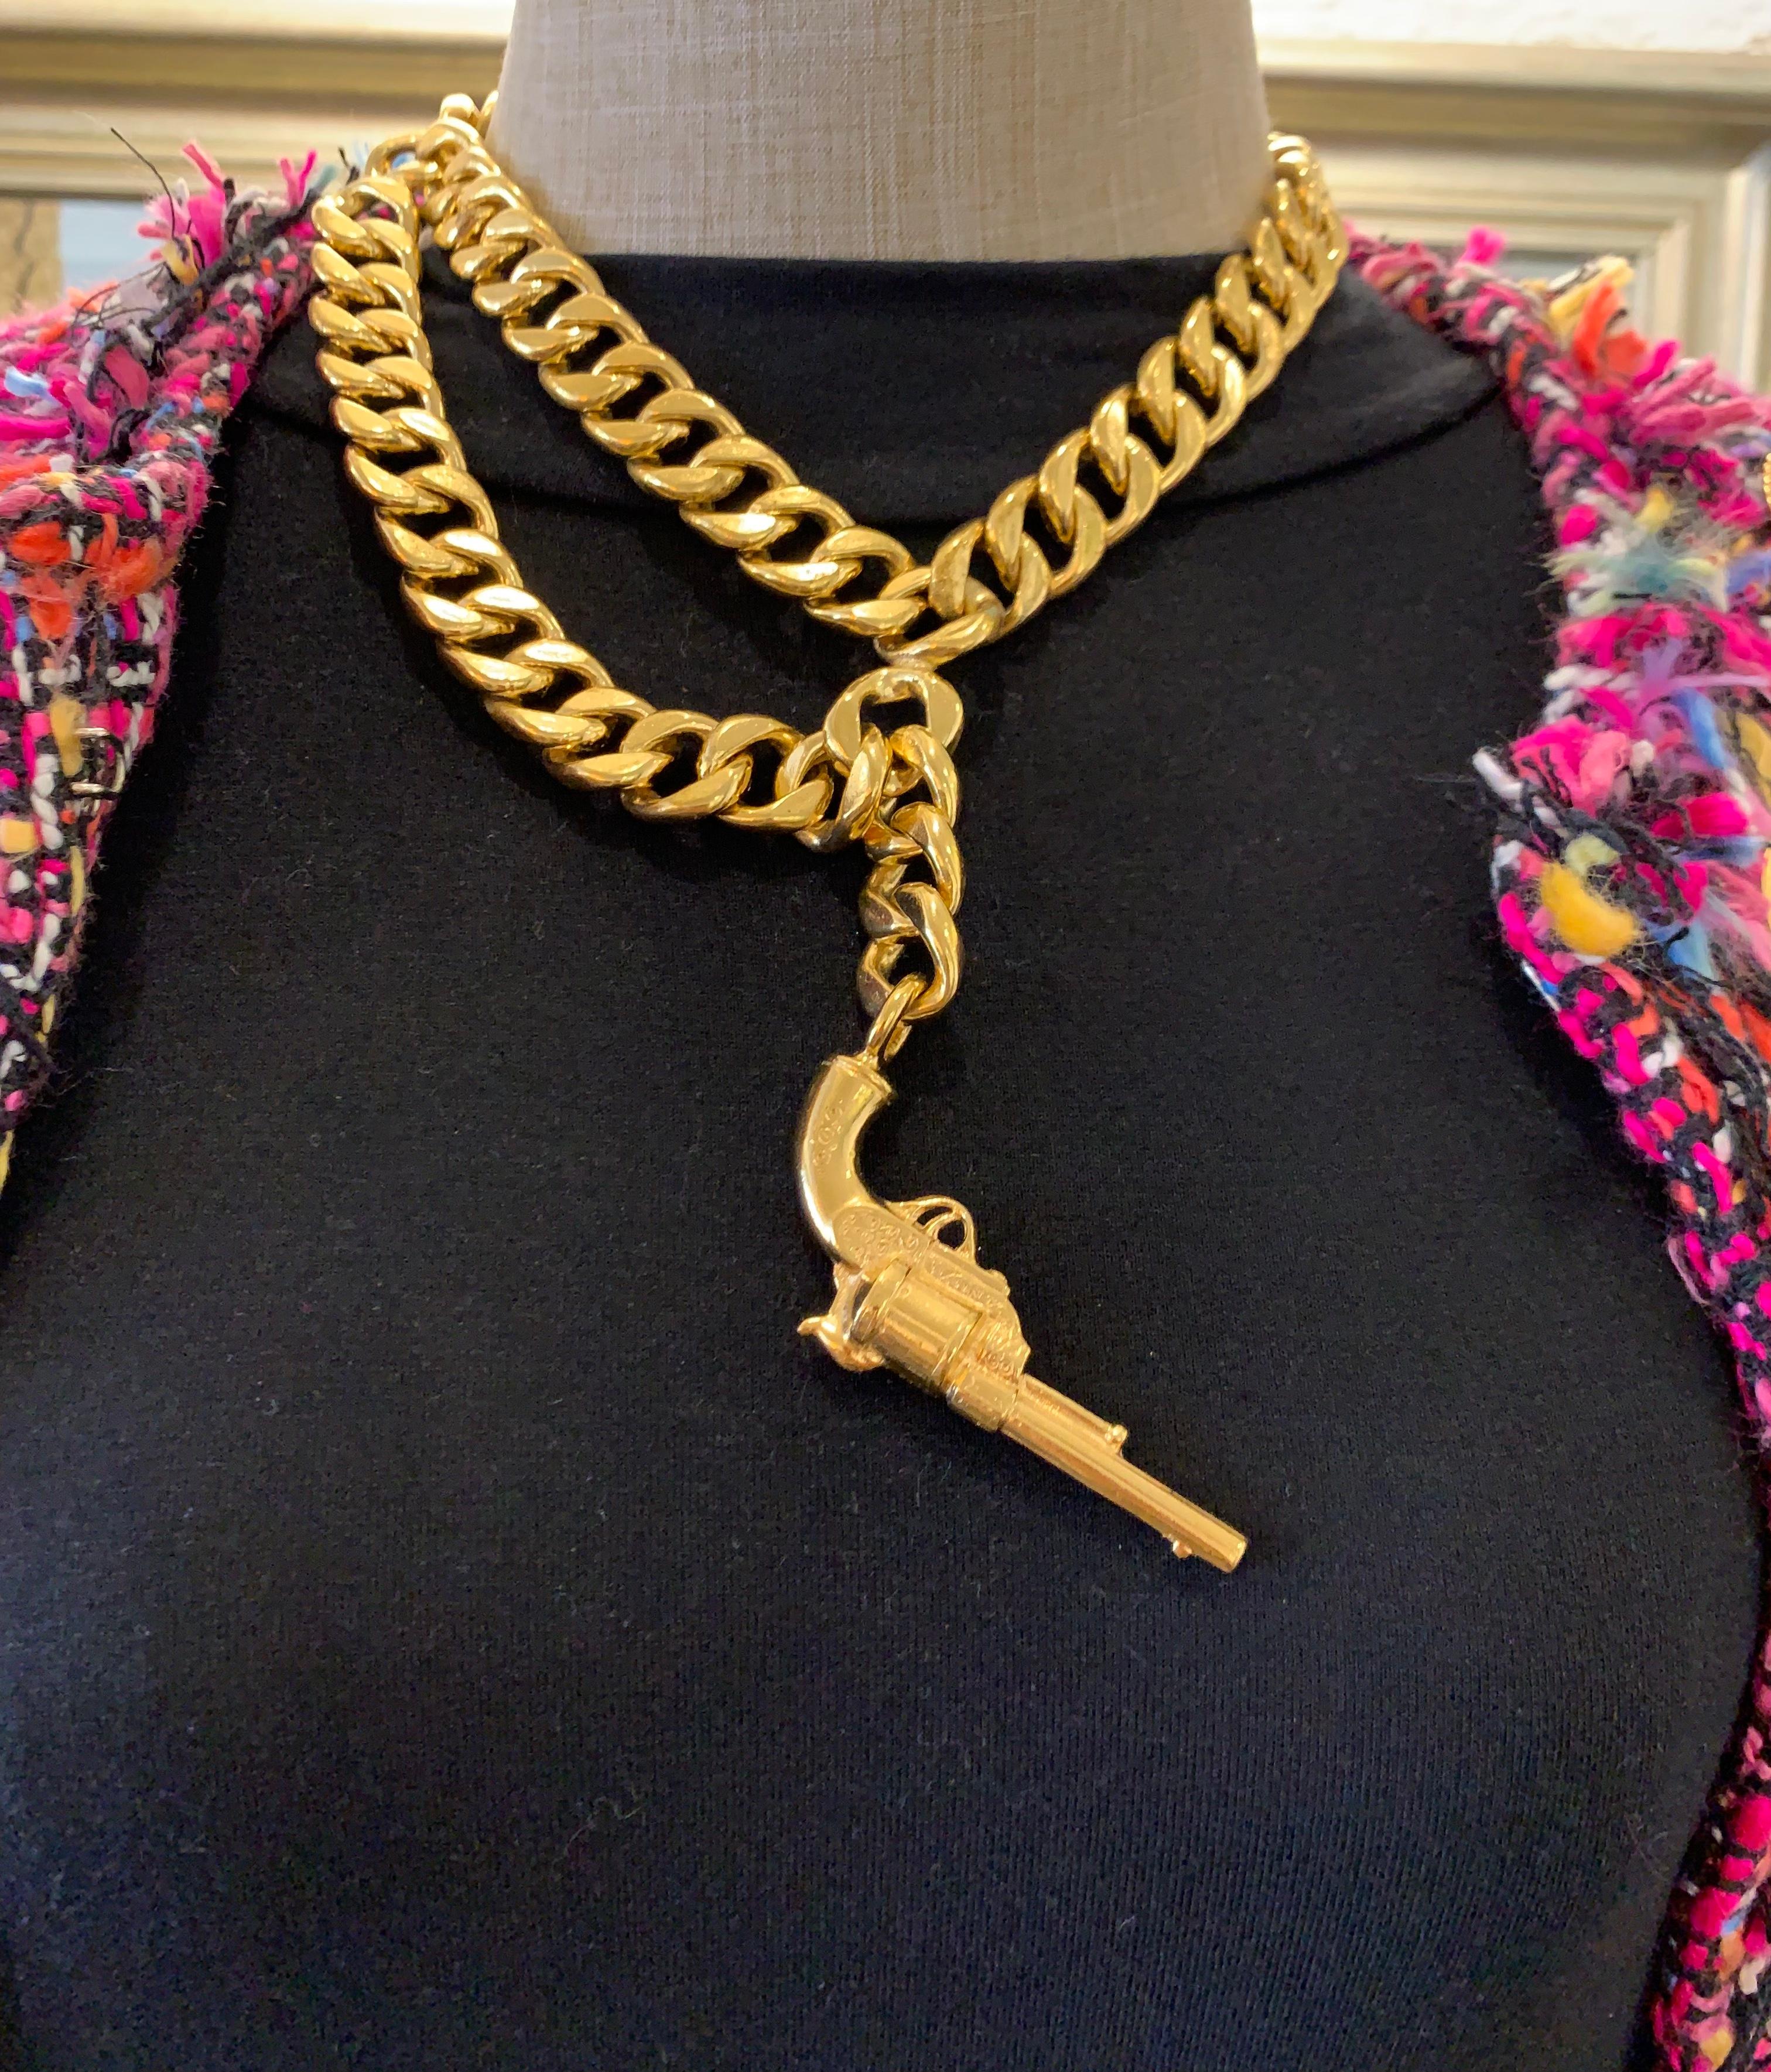 1980s Chanel good toned chain necklace featuring a gold toned pistol motif. Seen on Rhianna and Pharell. Hook fastening closure. Stamped CHANEL on hook. Length measures 41 cm. Comes with box.

Condition - Some signs of wear on chain consistent with